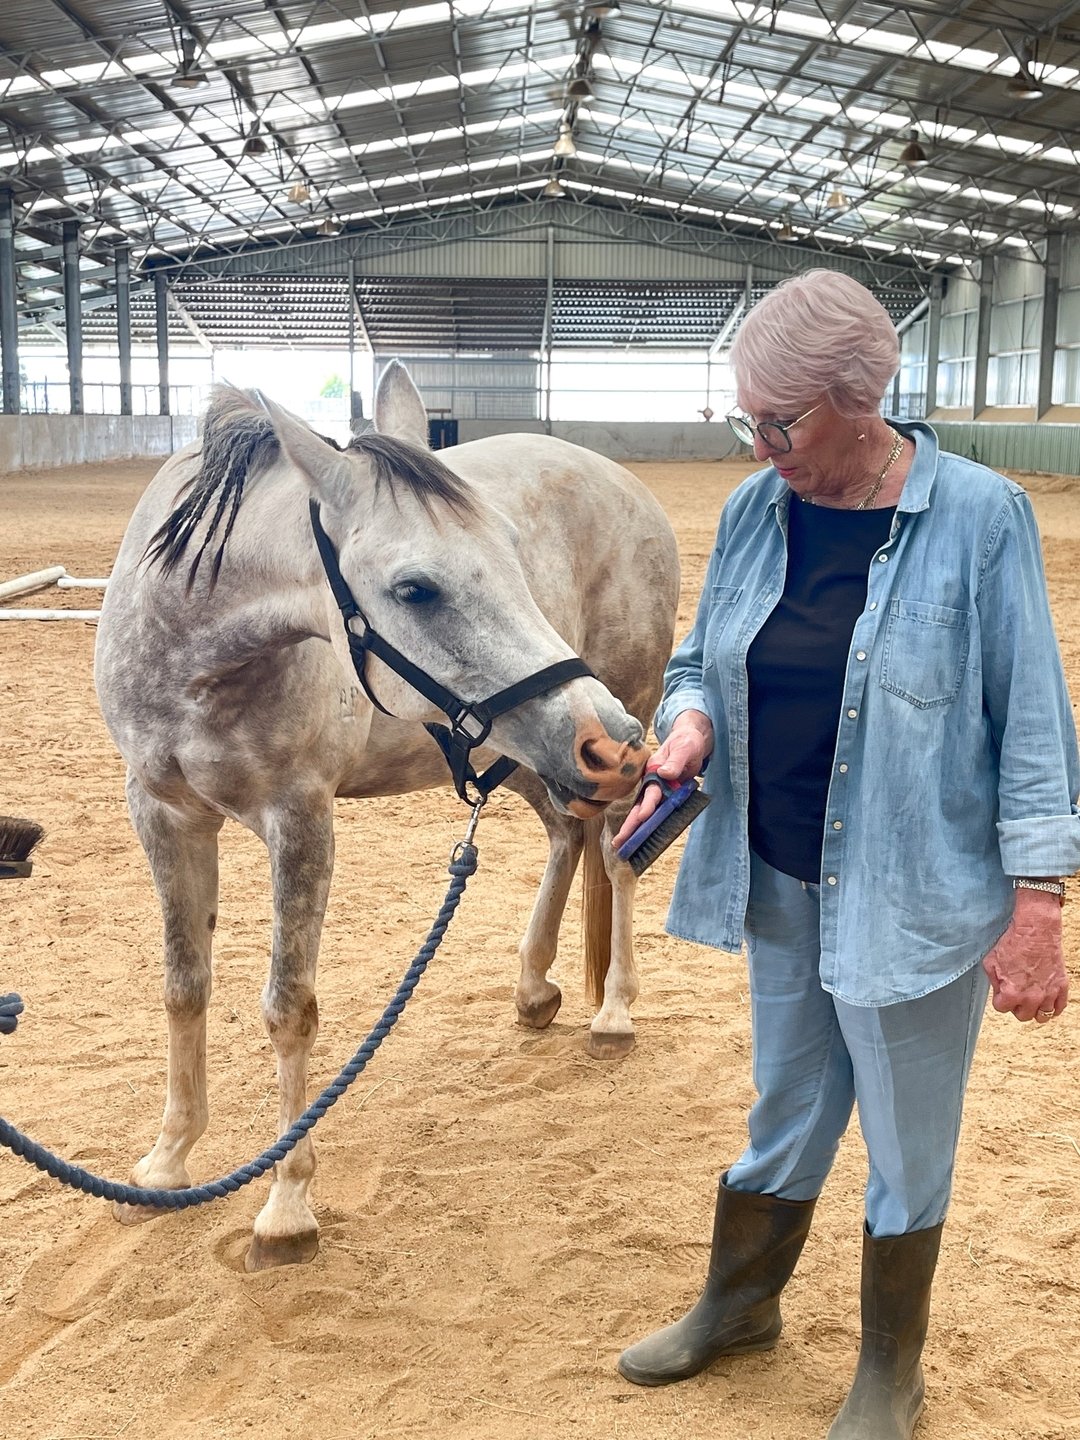 When we integrate horses into our workshops and retreats, the parallels with navigating daily life become crystal clear. Building effective communication, expressing our needs, and considering those of the collective bring a deeper understanding of o